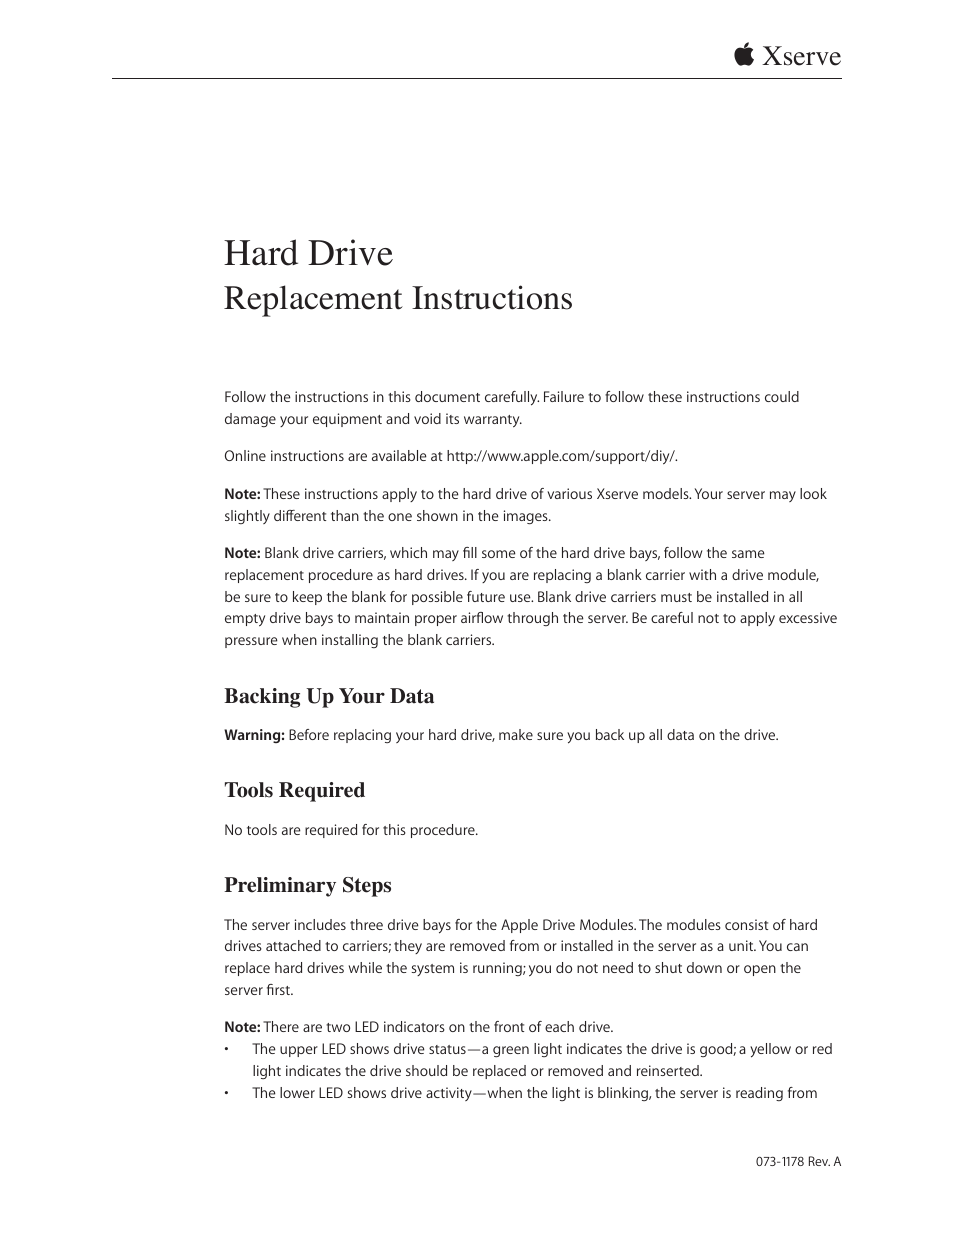 Xserve (Early 2008) DIY Procedure for Hard Drive